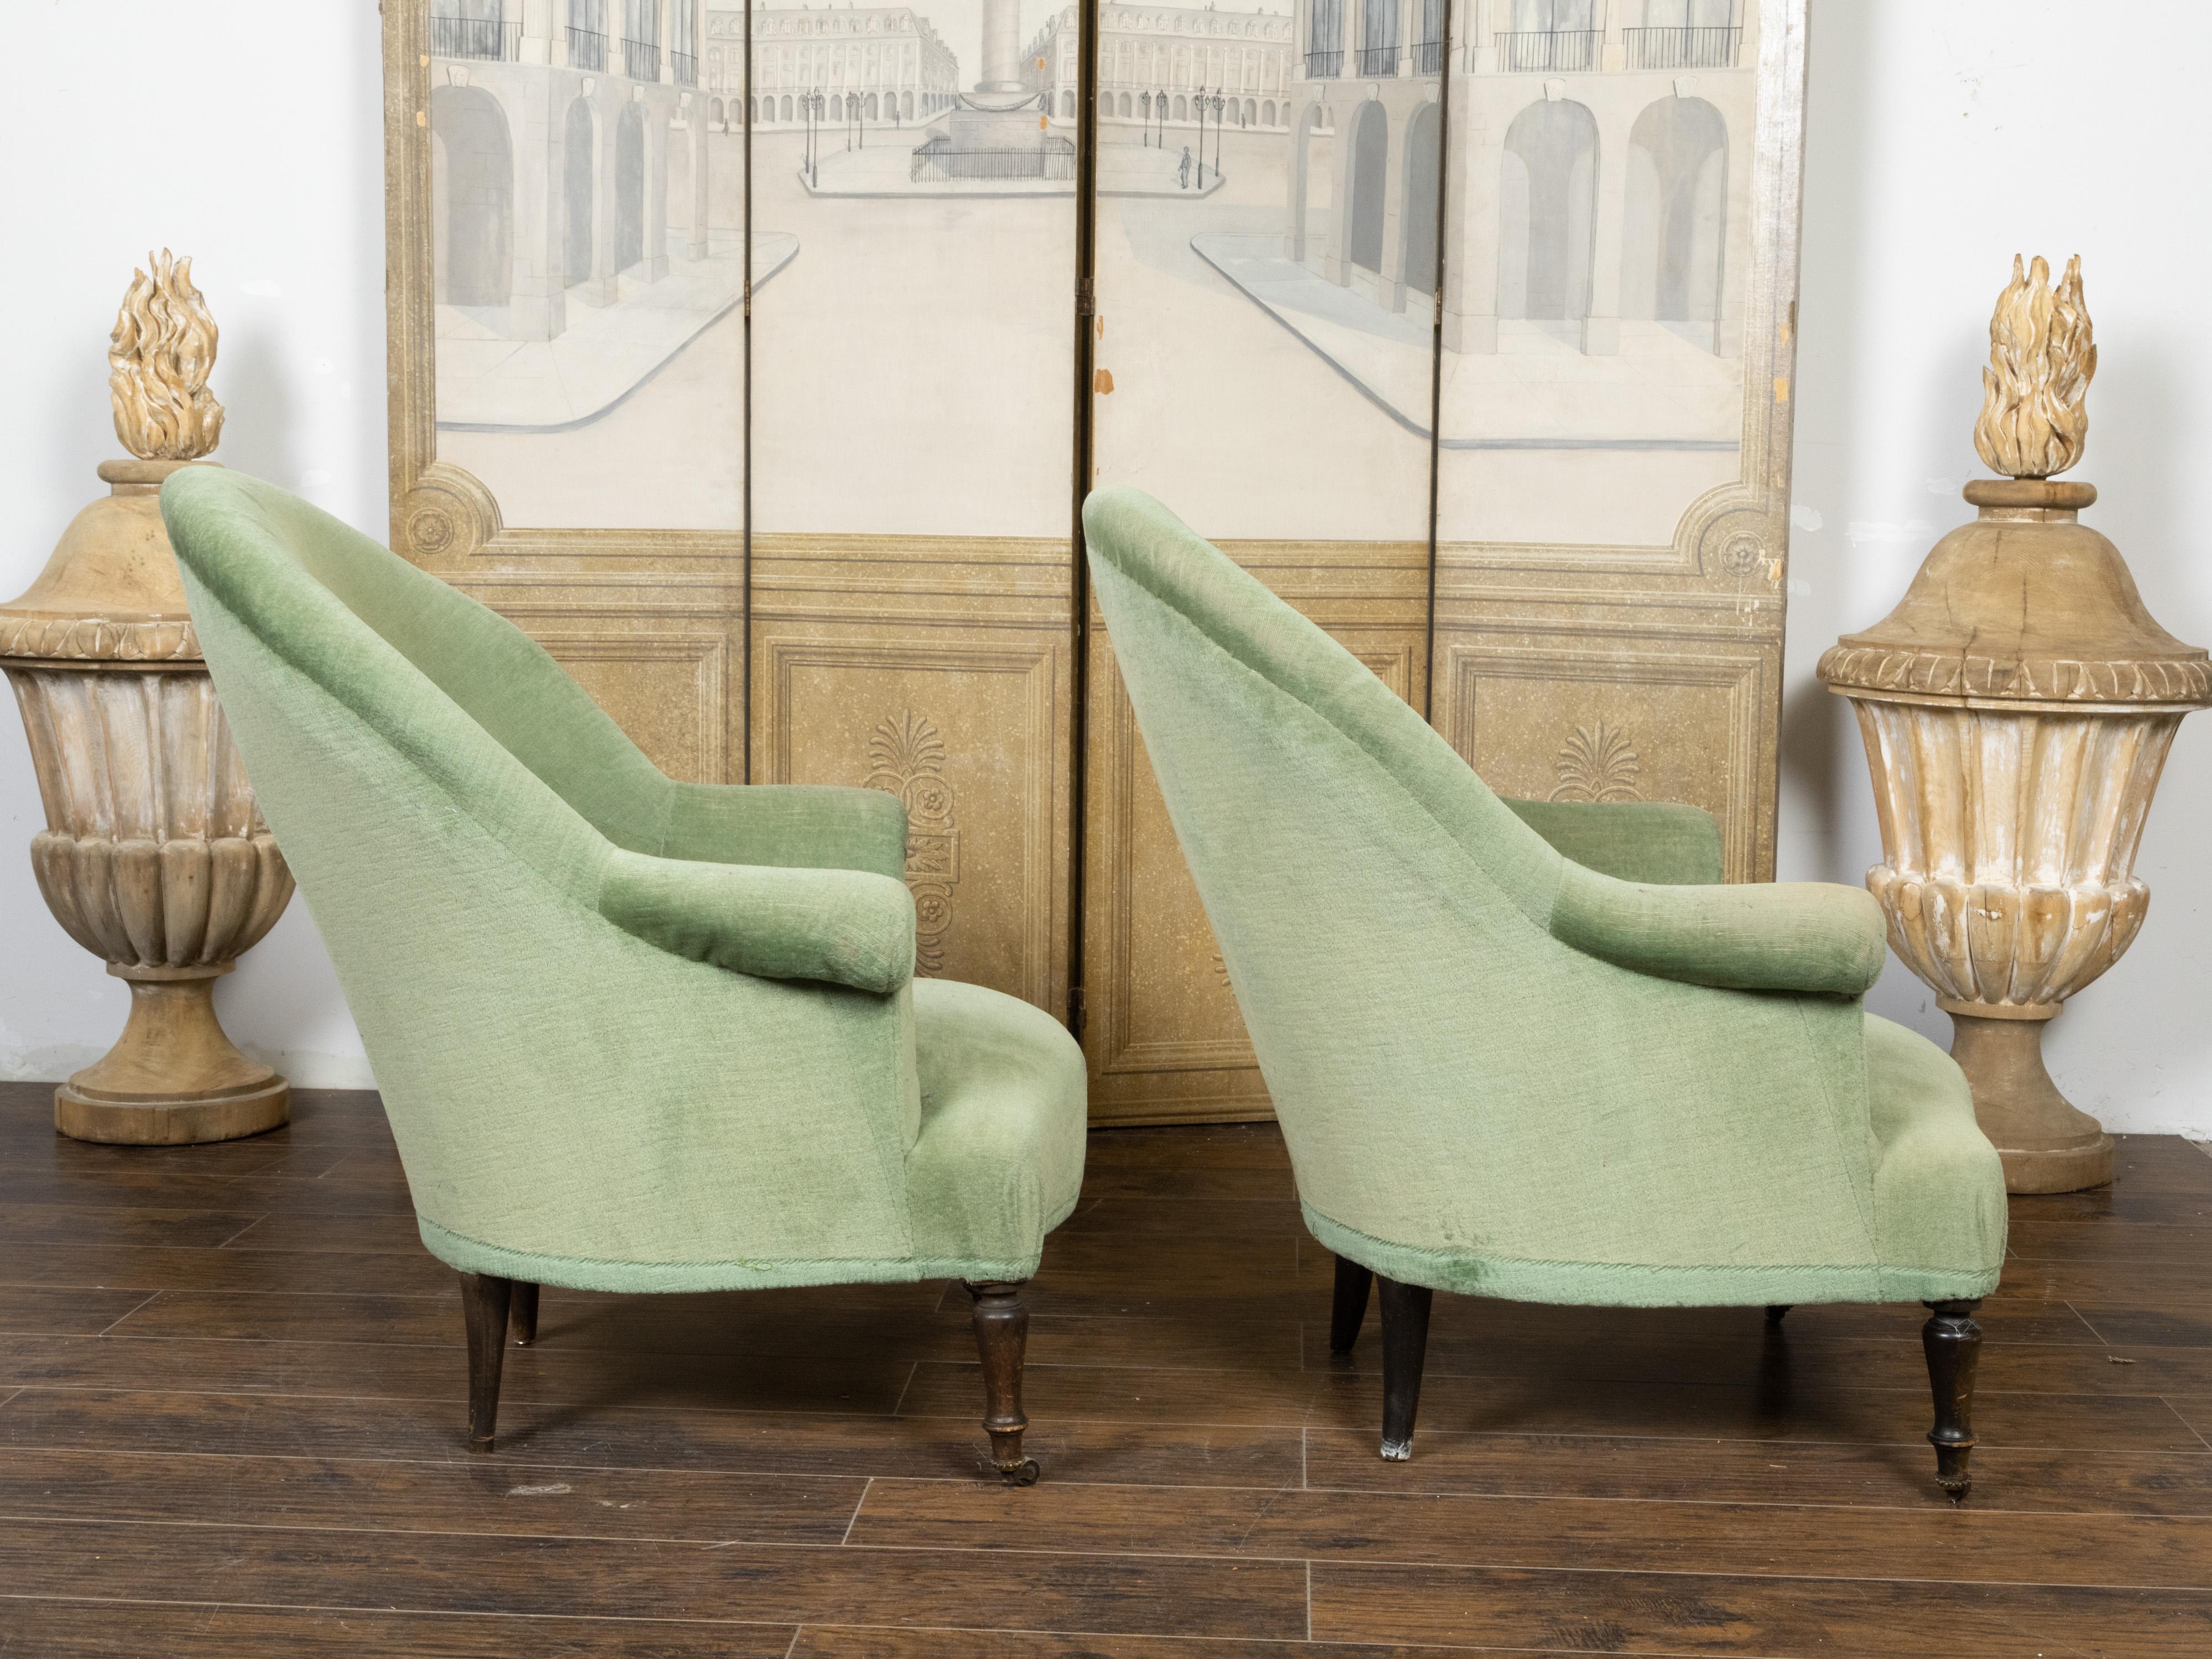 Pair of French Turn of the Century Bergère Chairs with Green Velvet Upholstery For Sale 2